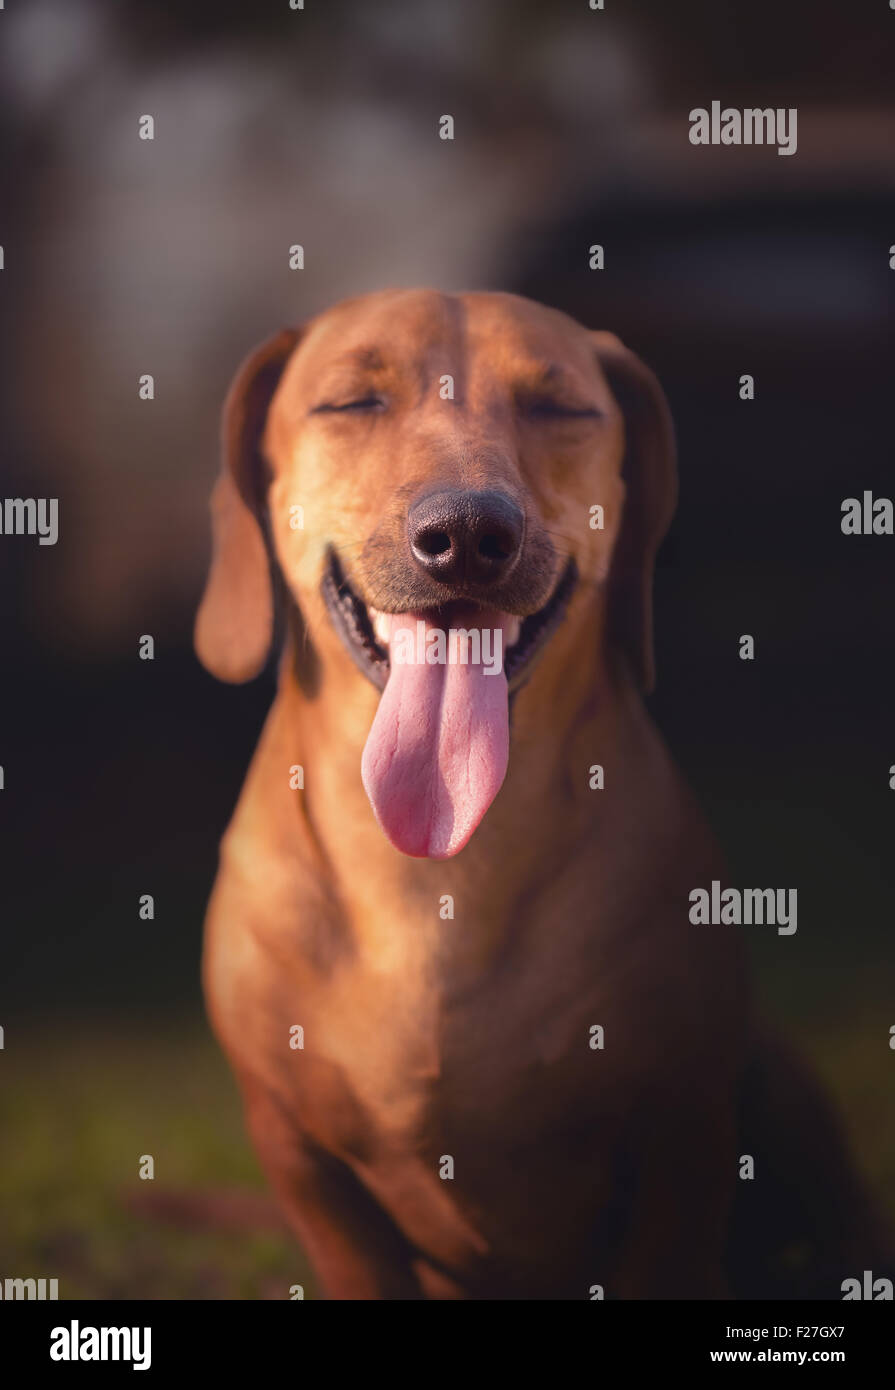 Dog smiling with eyes closed under the sunset. Depth of field with focus on the nose. Stock Photo